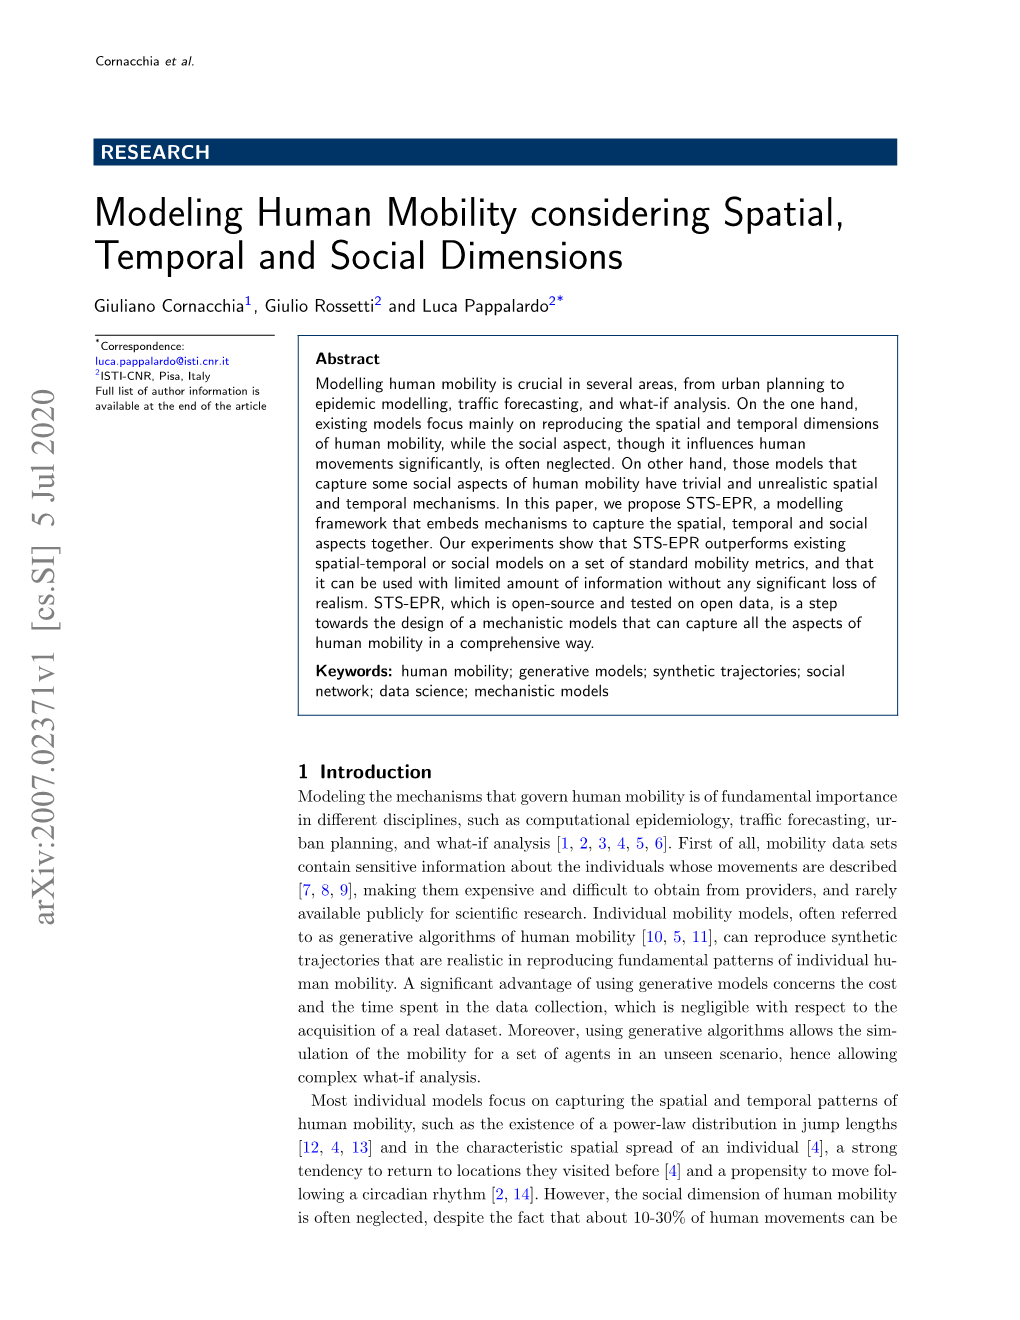 Modeling Human Mobility Considering Spatial, Temporal and Social Dimensions